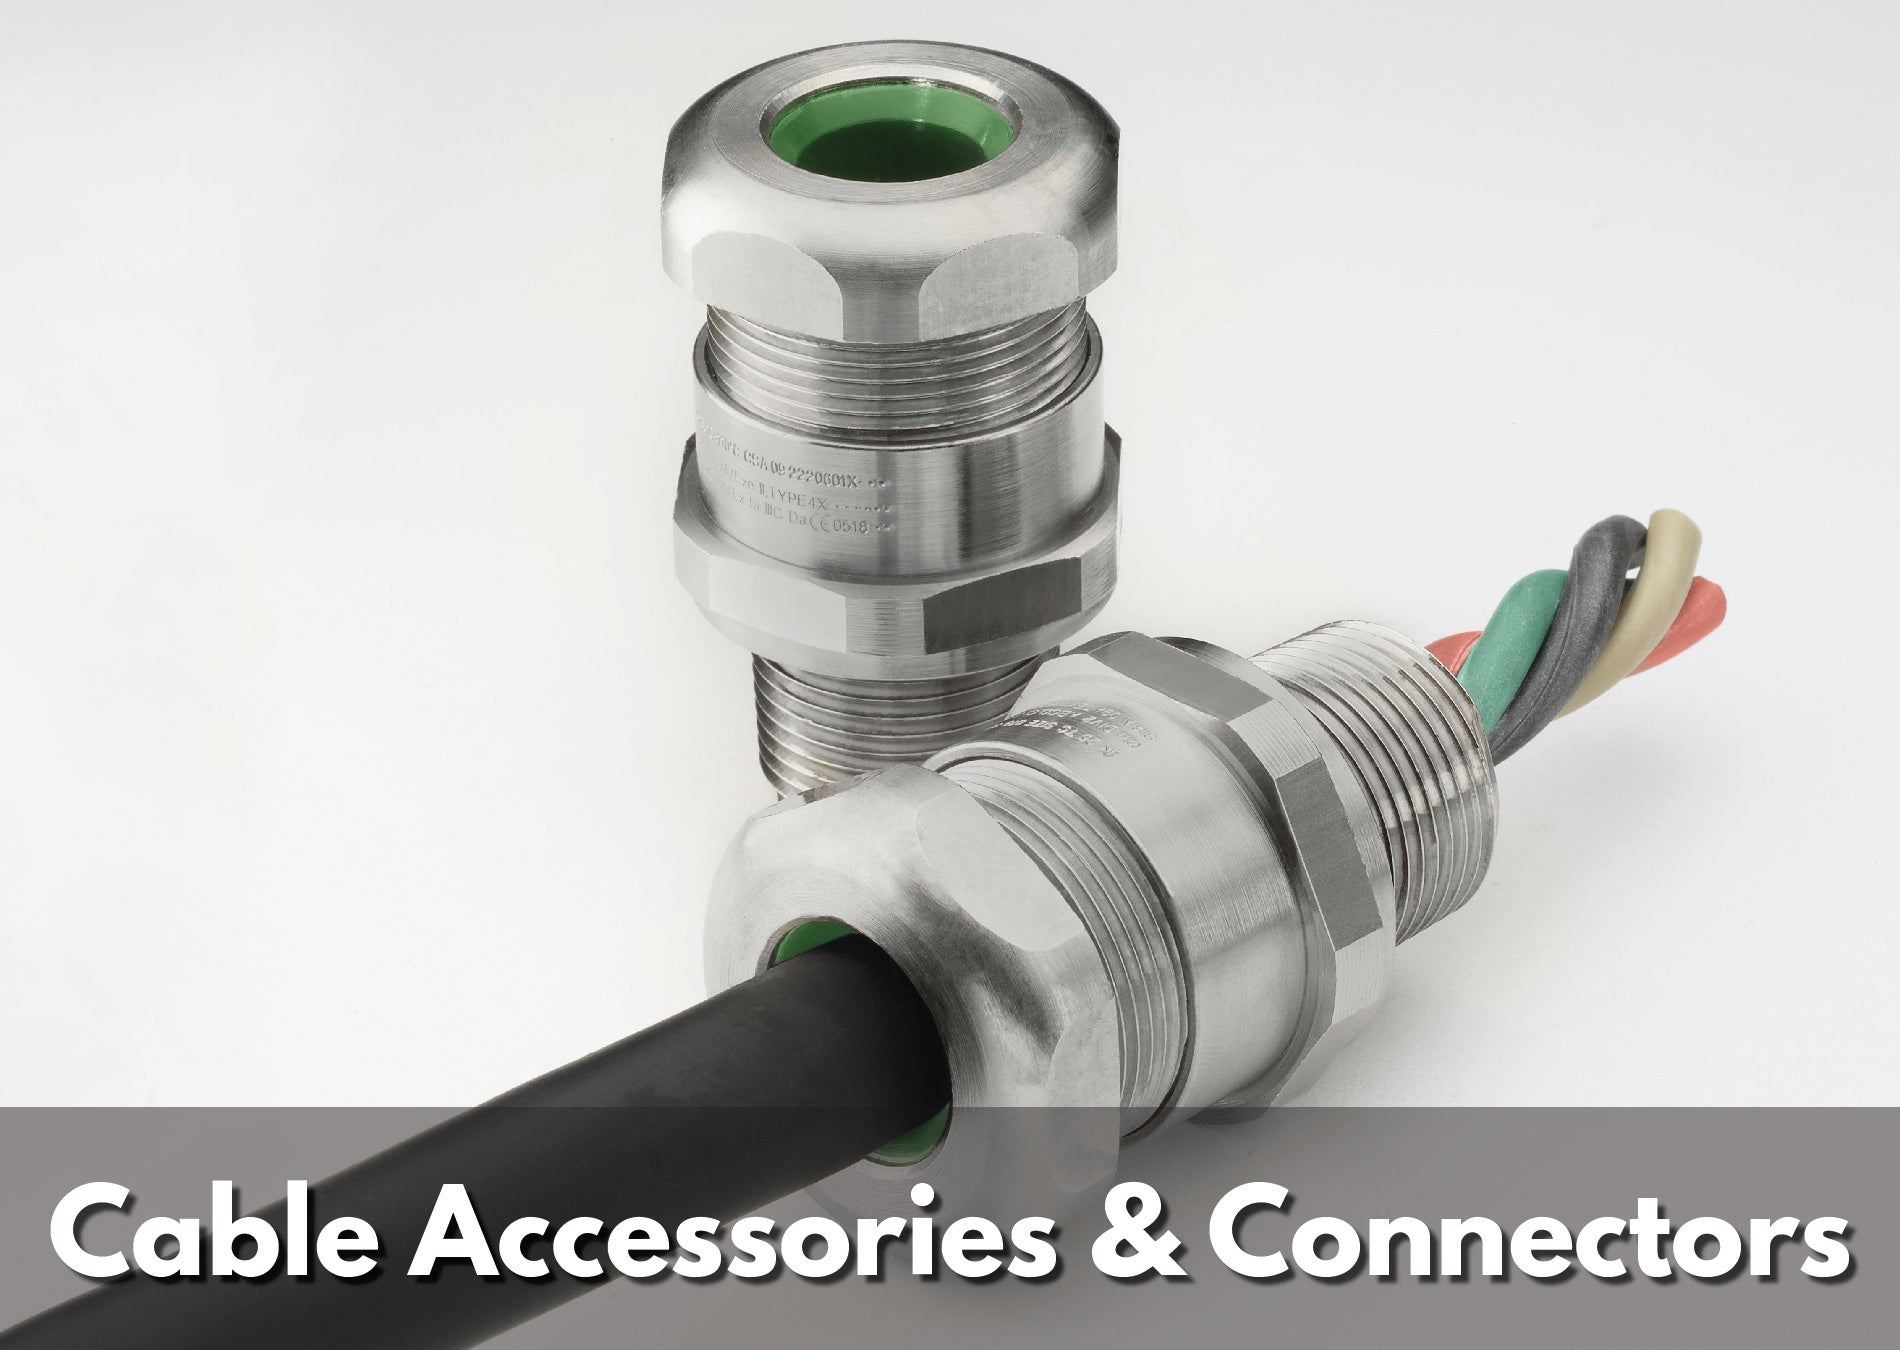 Texcan - View All Products - Cable Accessories & connector .jpg